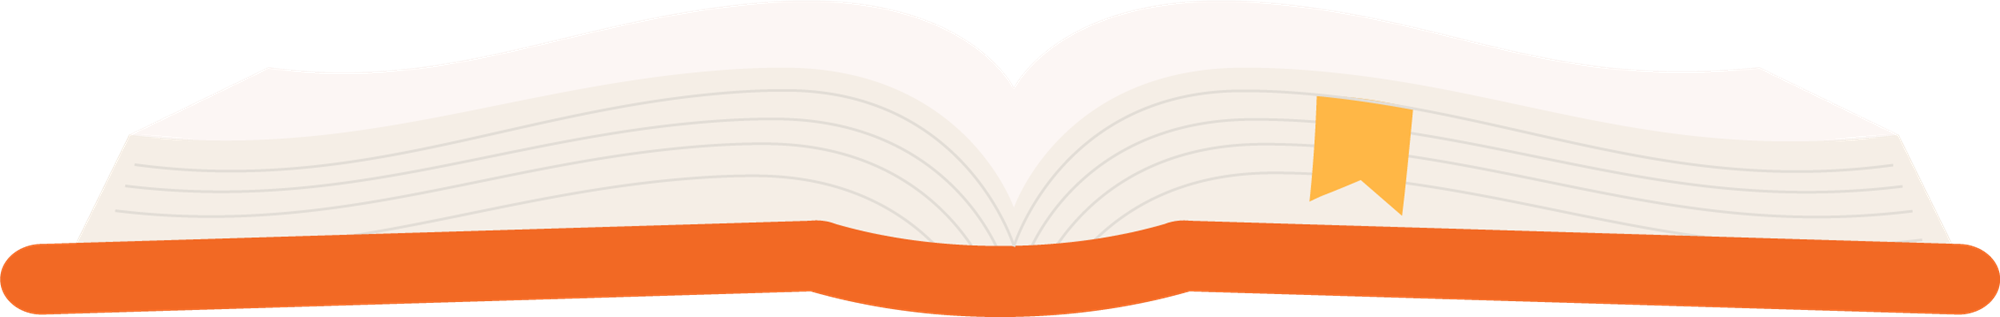 Image of an illustrated open book